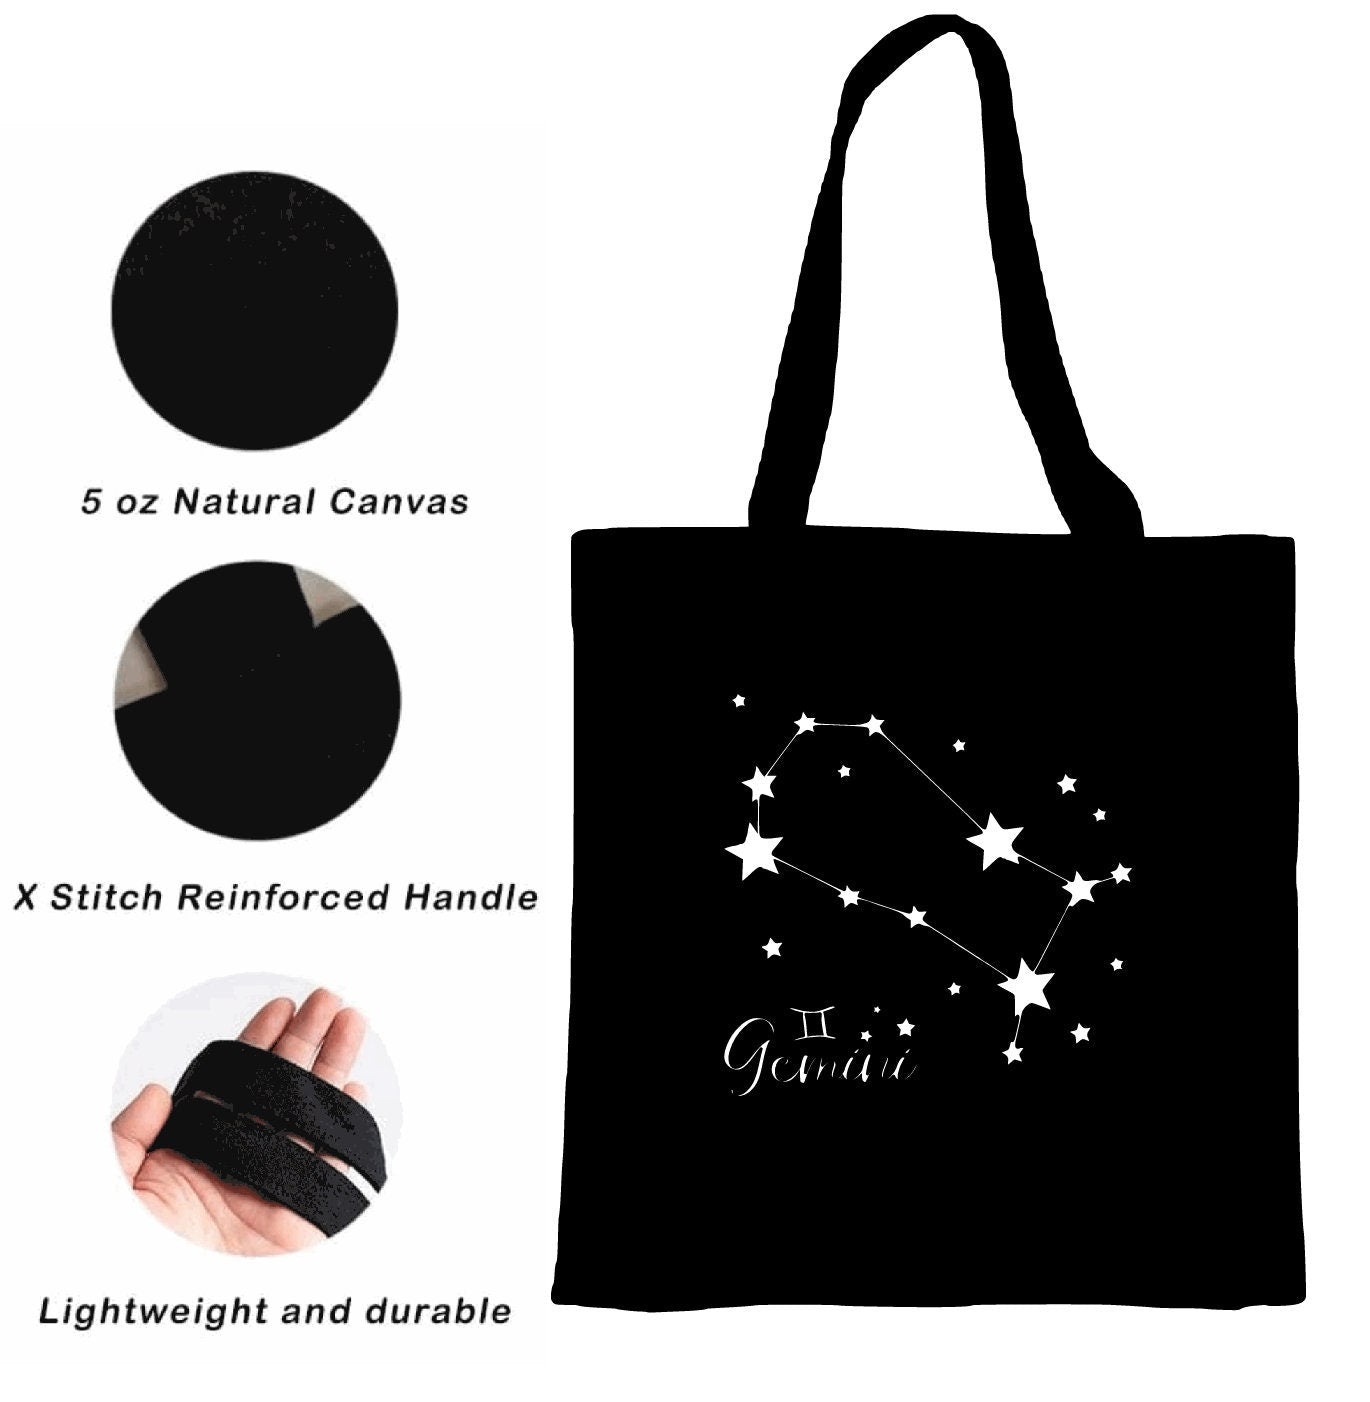 Zodiac Tote bag|Gemini Gift|Cancer|Custom Reusable Canvas Tote Bag|Astrology Horoscope|Lightweight Tote |Birthday| Christmas Gift for Her